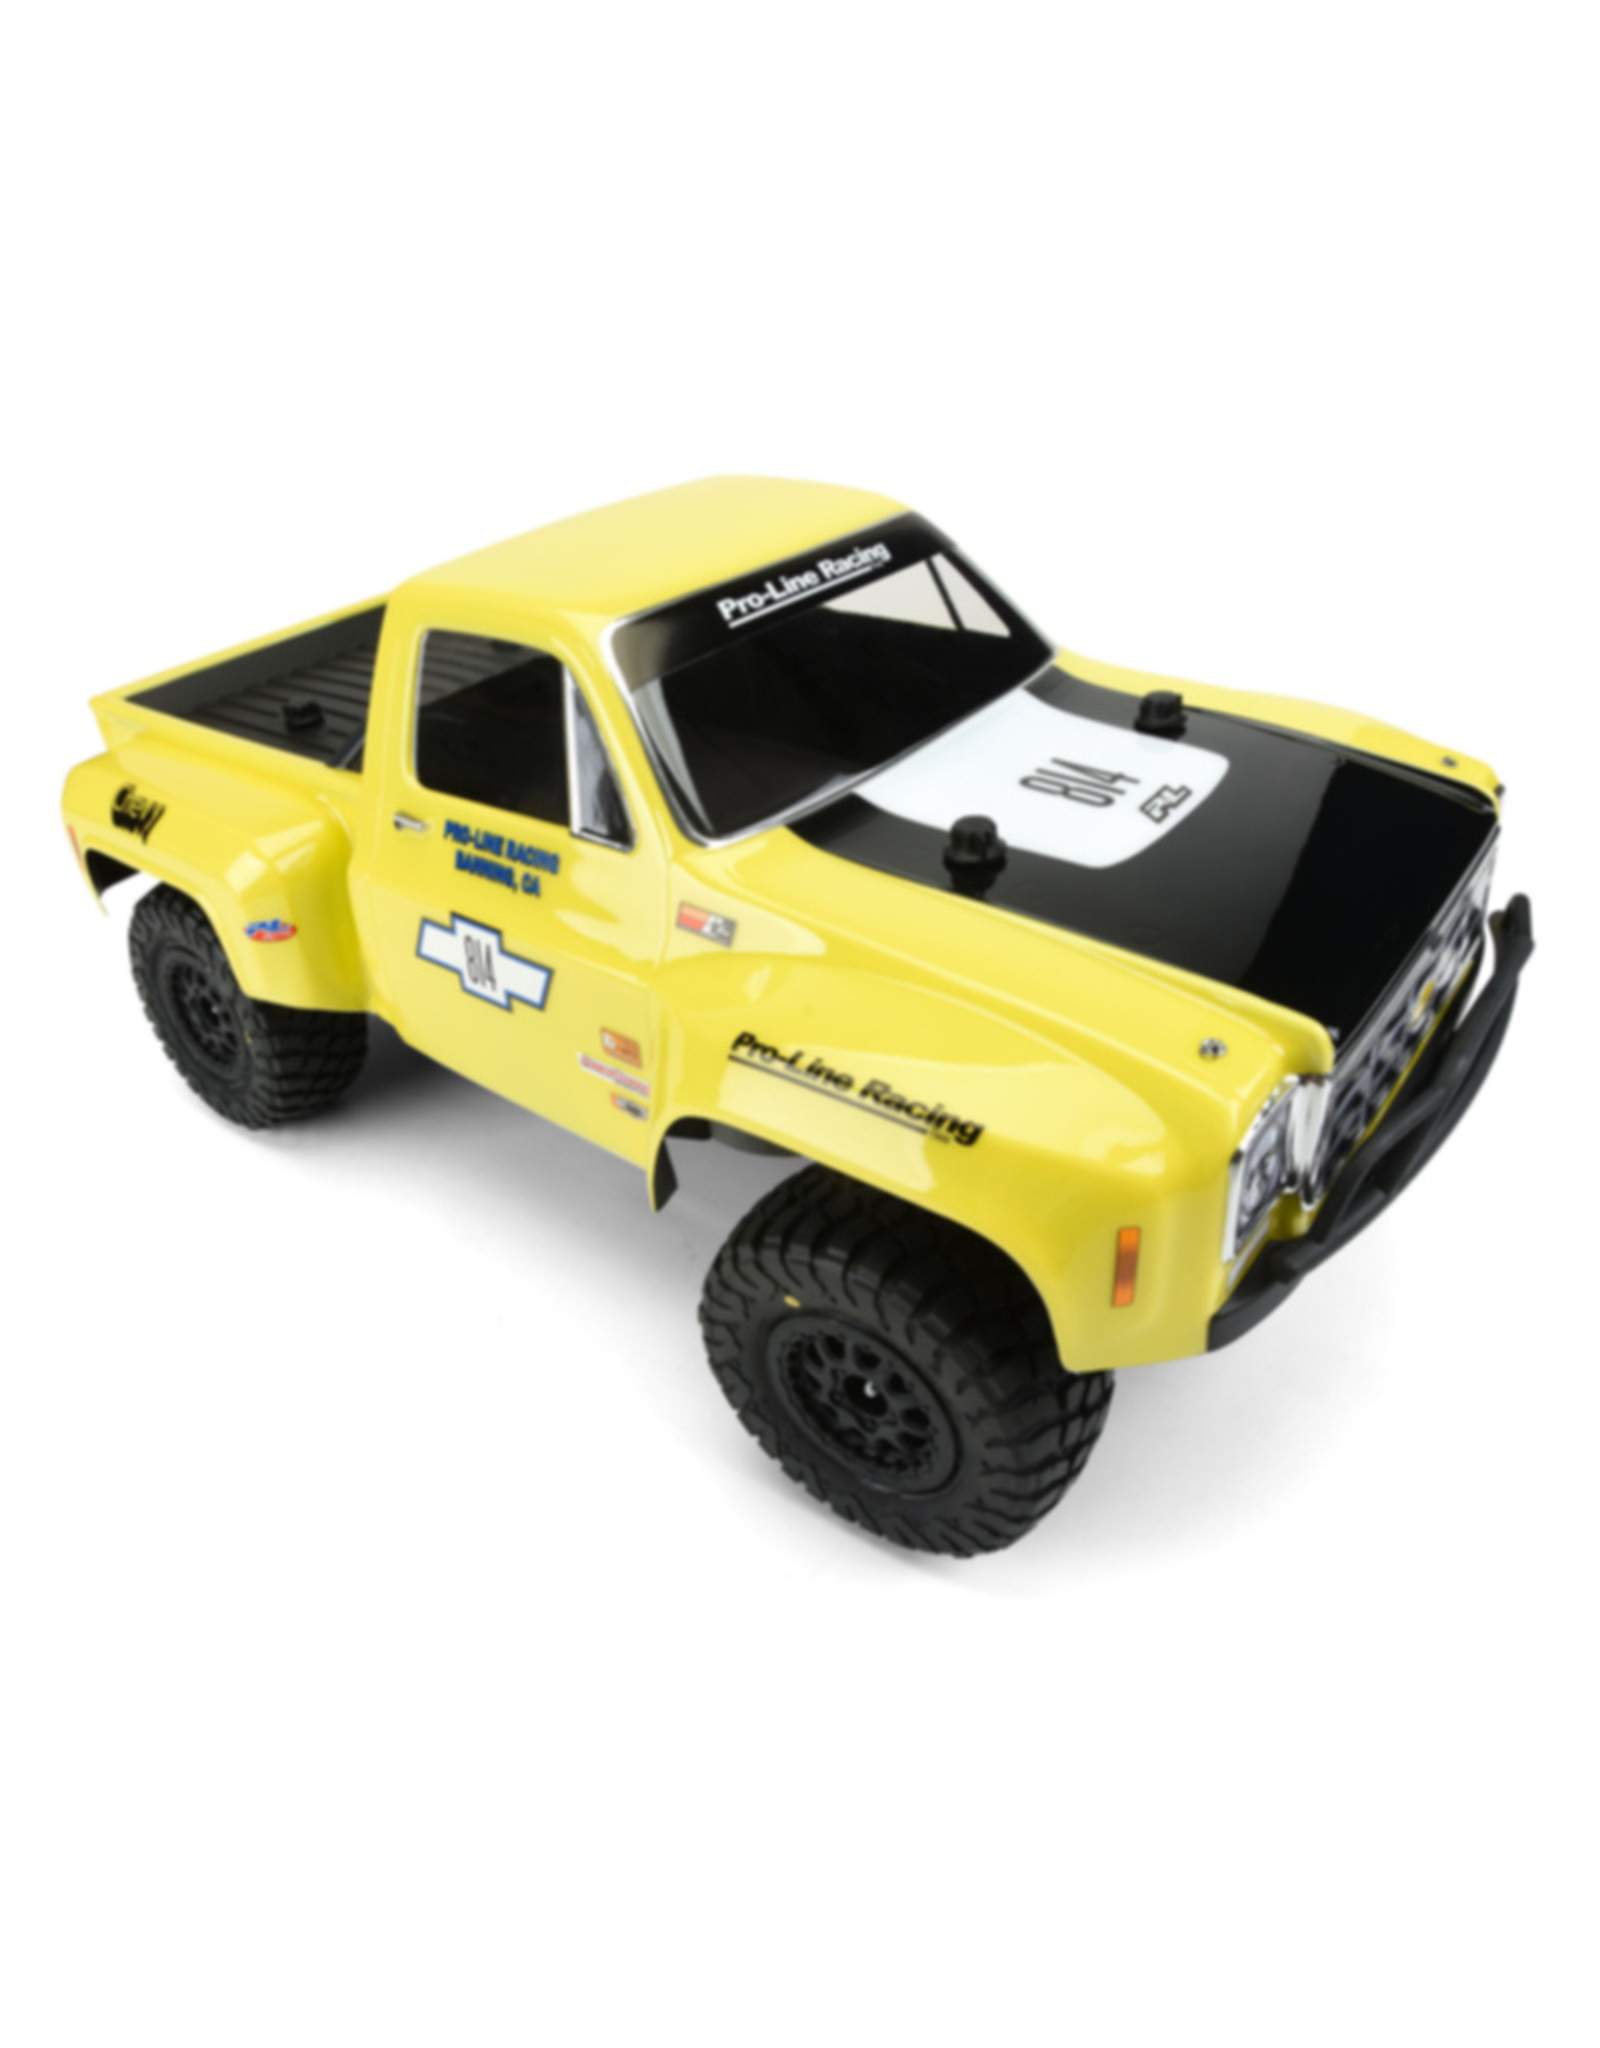 Pro-Line Racing PRO351000  1978 Chevy C-10 Race Truck Clear Body : SLH 2WD